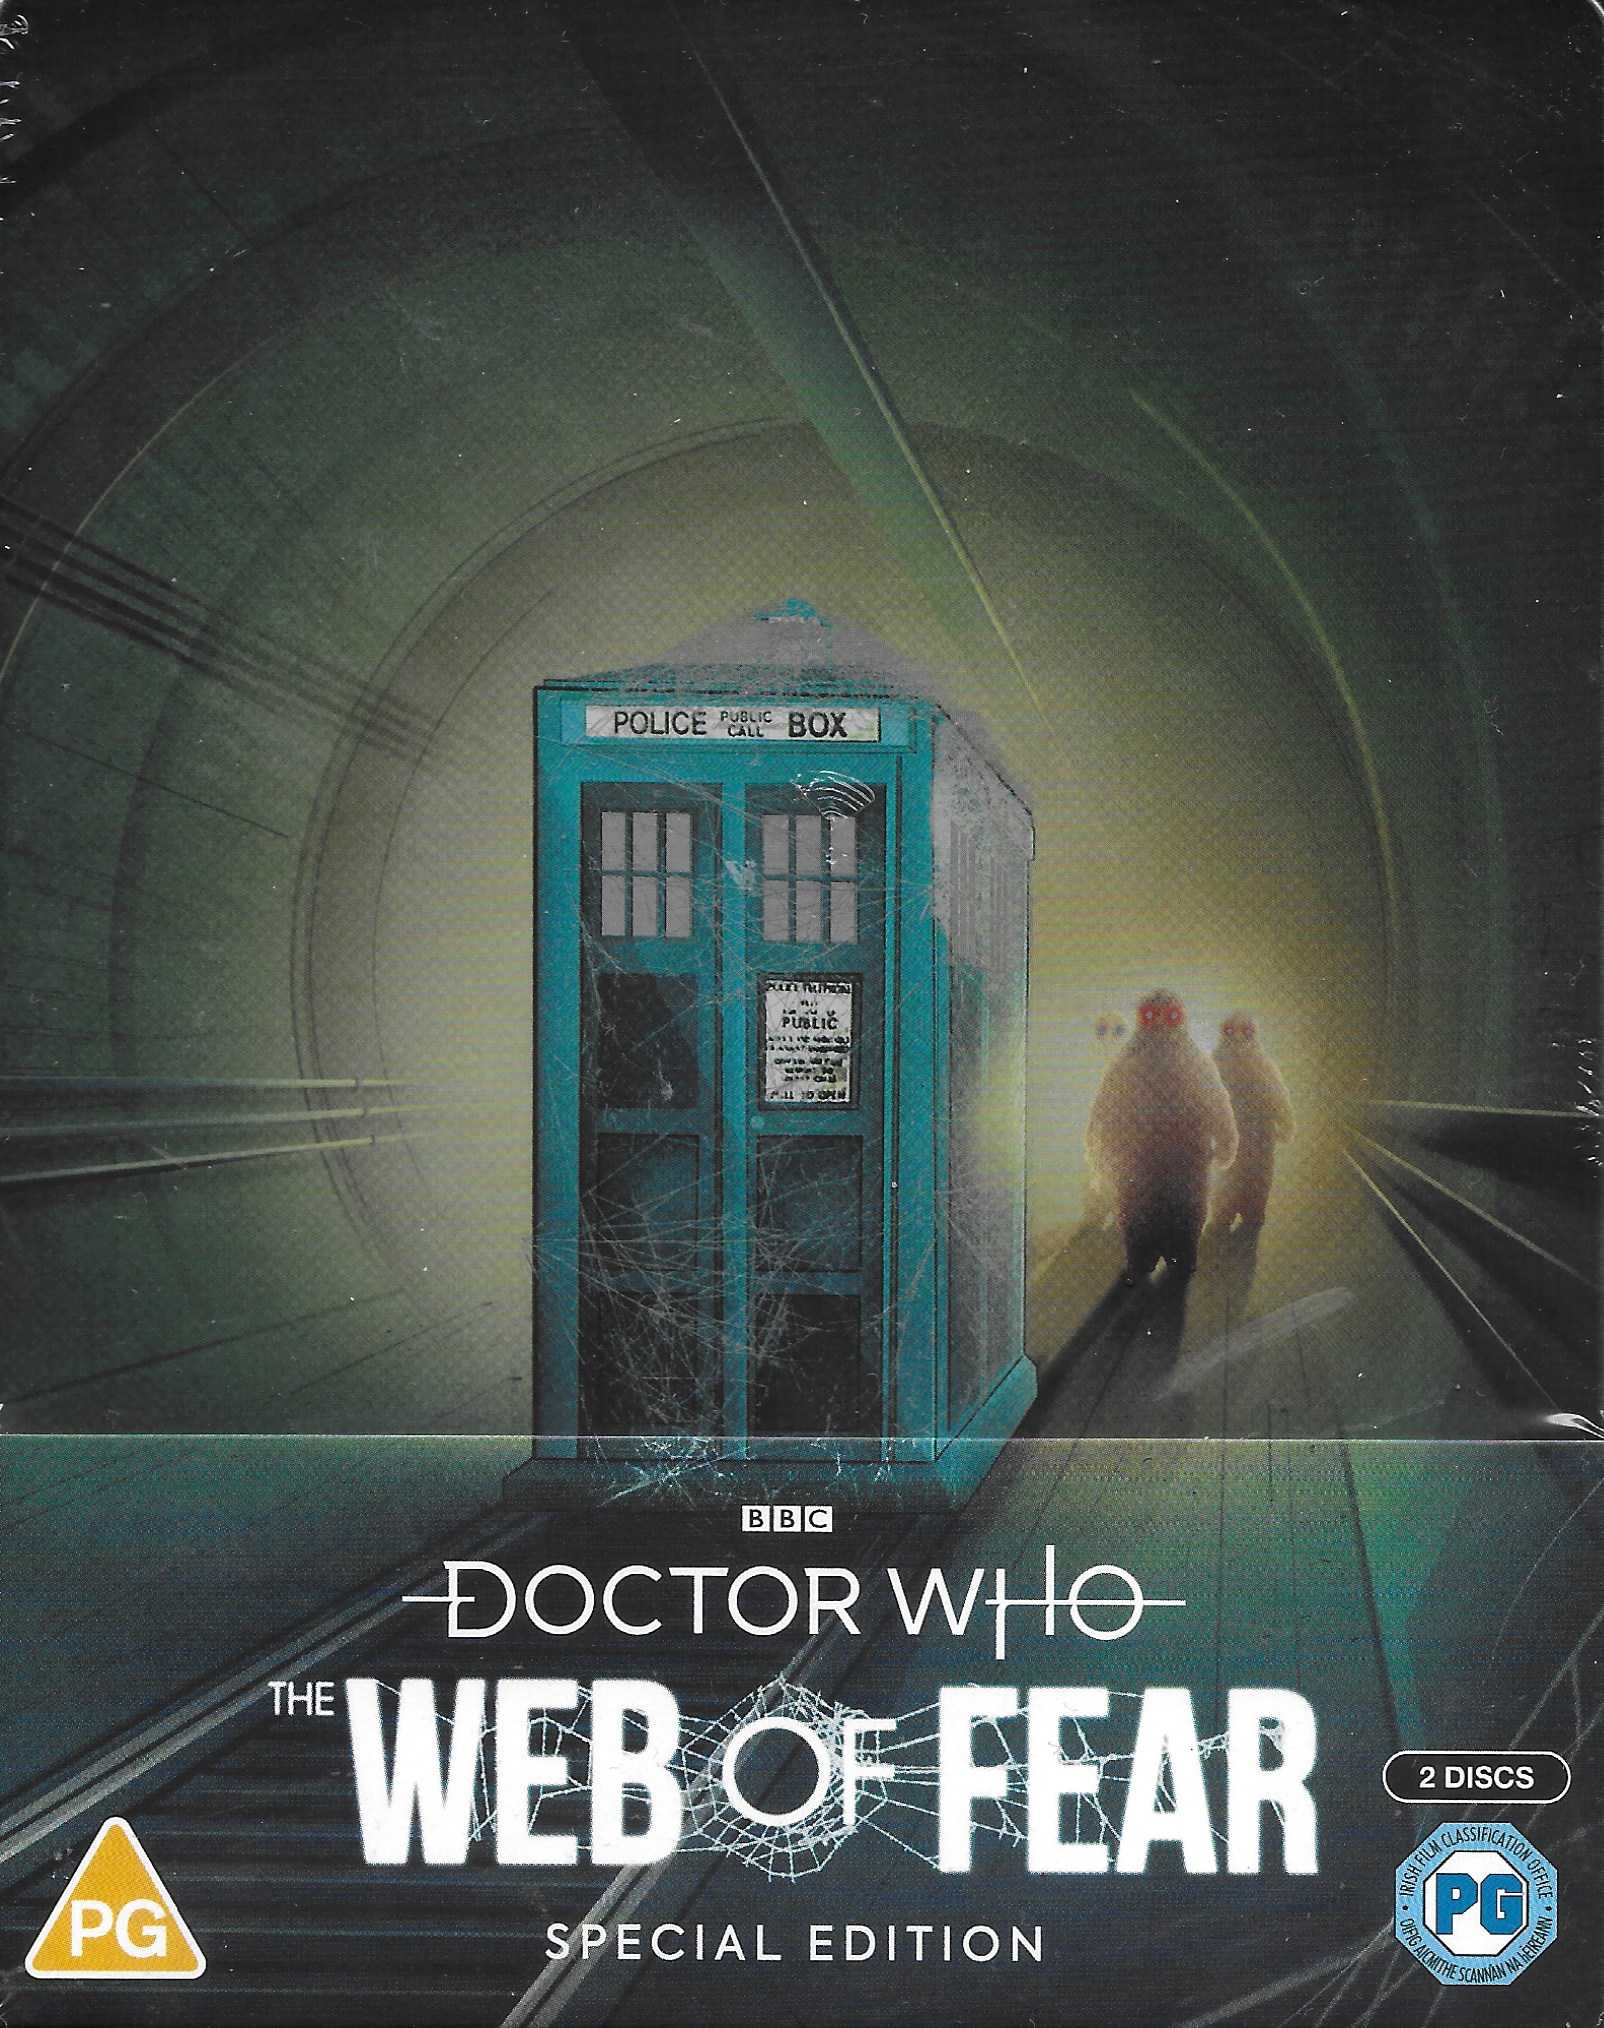 Picture of BBCBD 0522 Doctor Who - The web of fear (Limited Amazon steelbook edition) by artist Mervyn Haisman / Henry Lincoln from the BBC blu-rays - Records and Tapes library